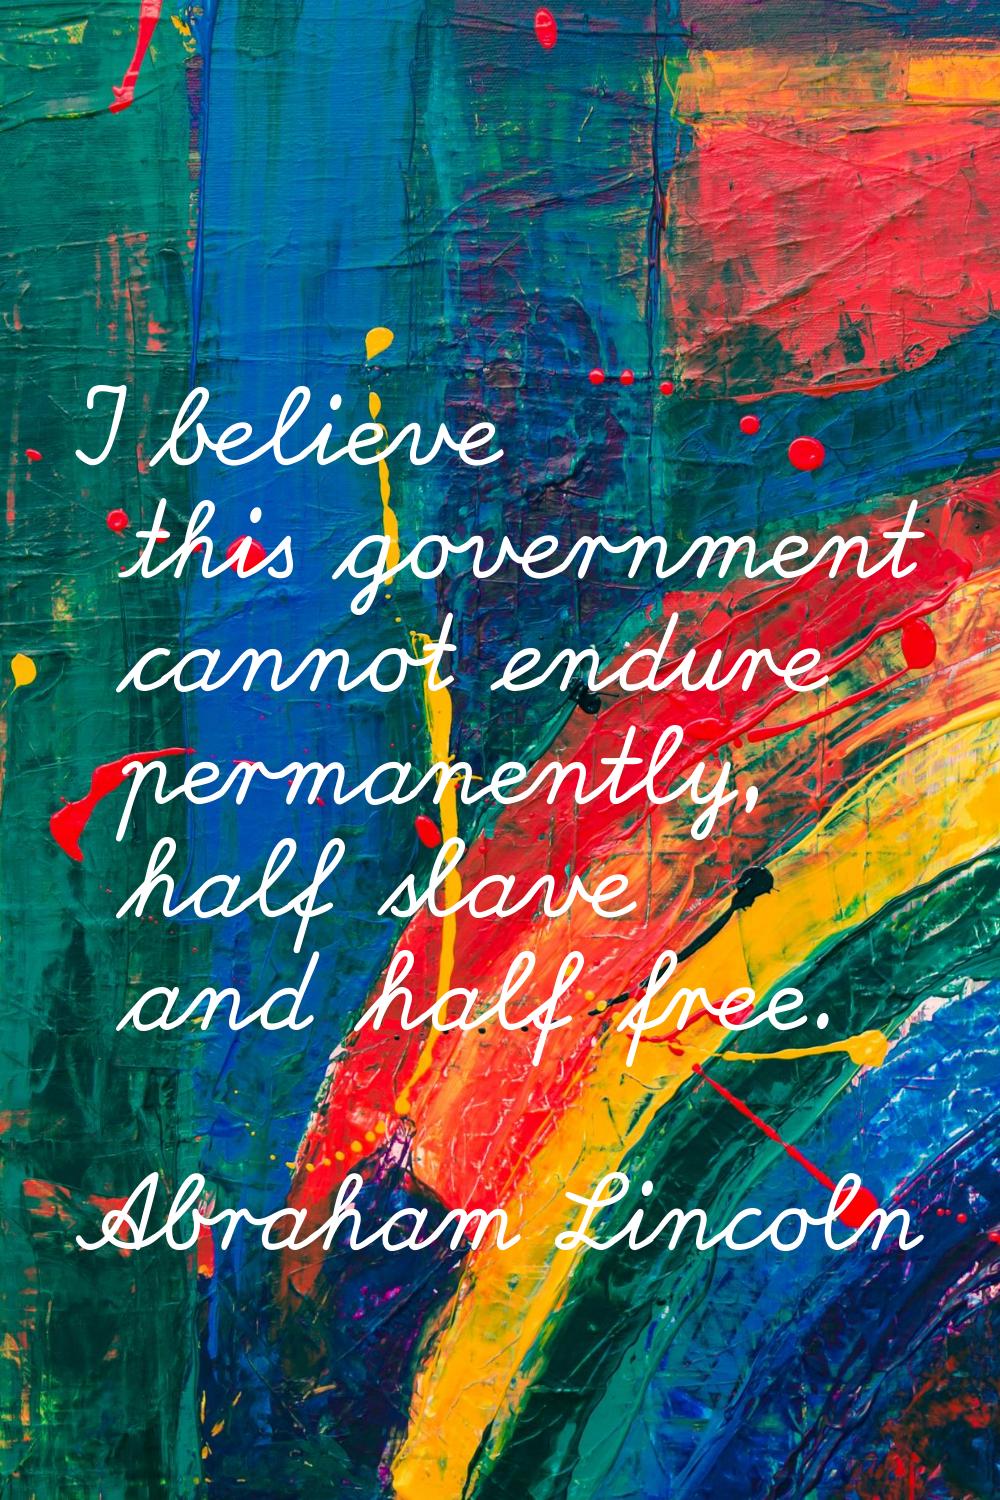 I believe this government cannot endure permanently, half slave and half free.